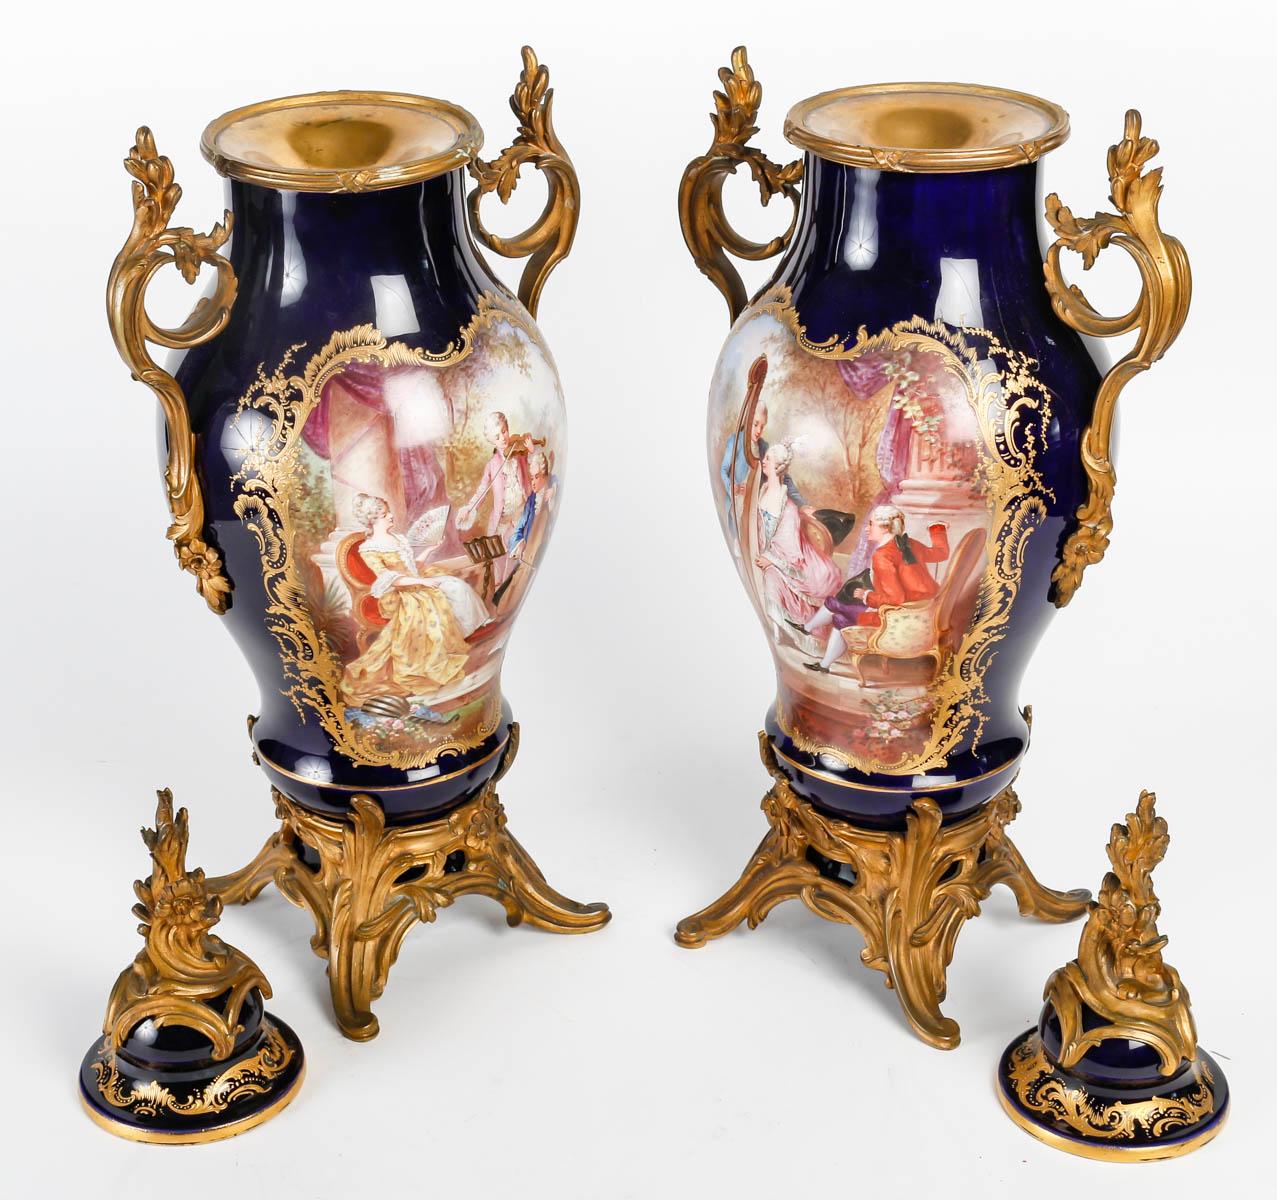 Rare Pair of Sèvres Porcelain Covered Vases, 19th Century. For Sale 1